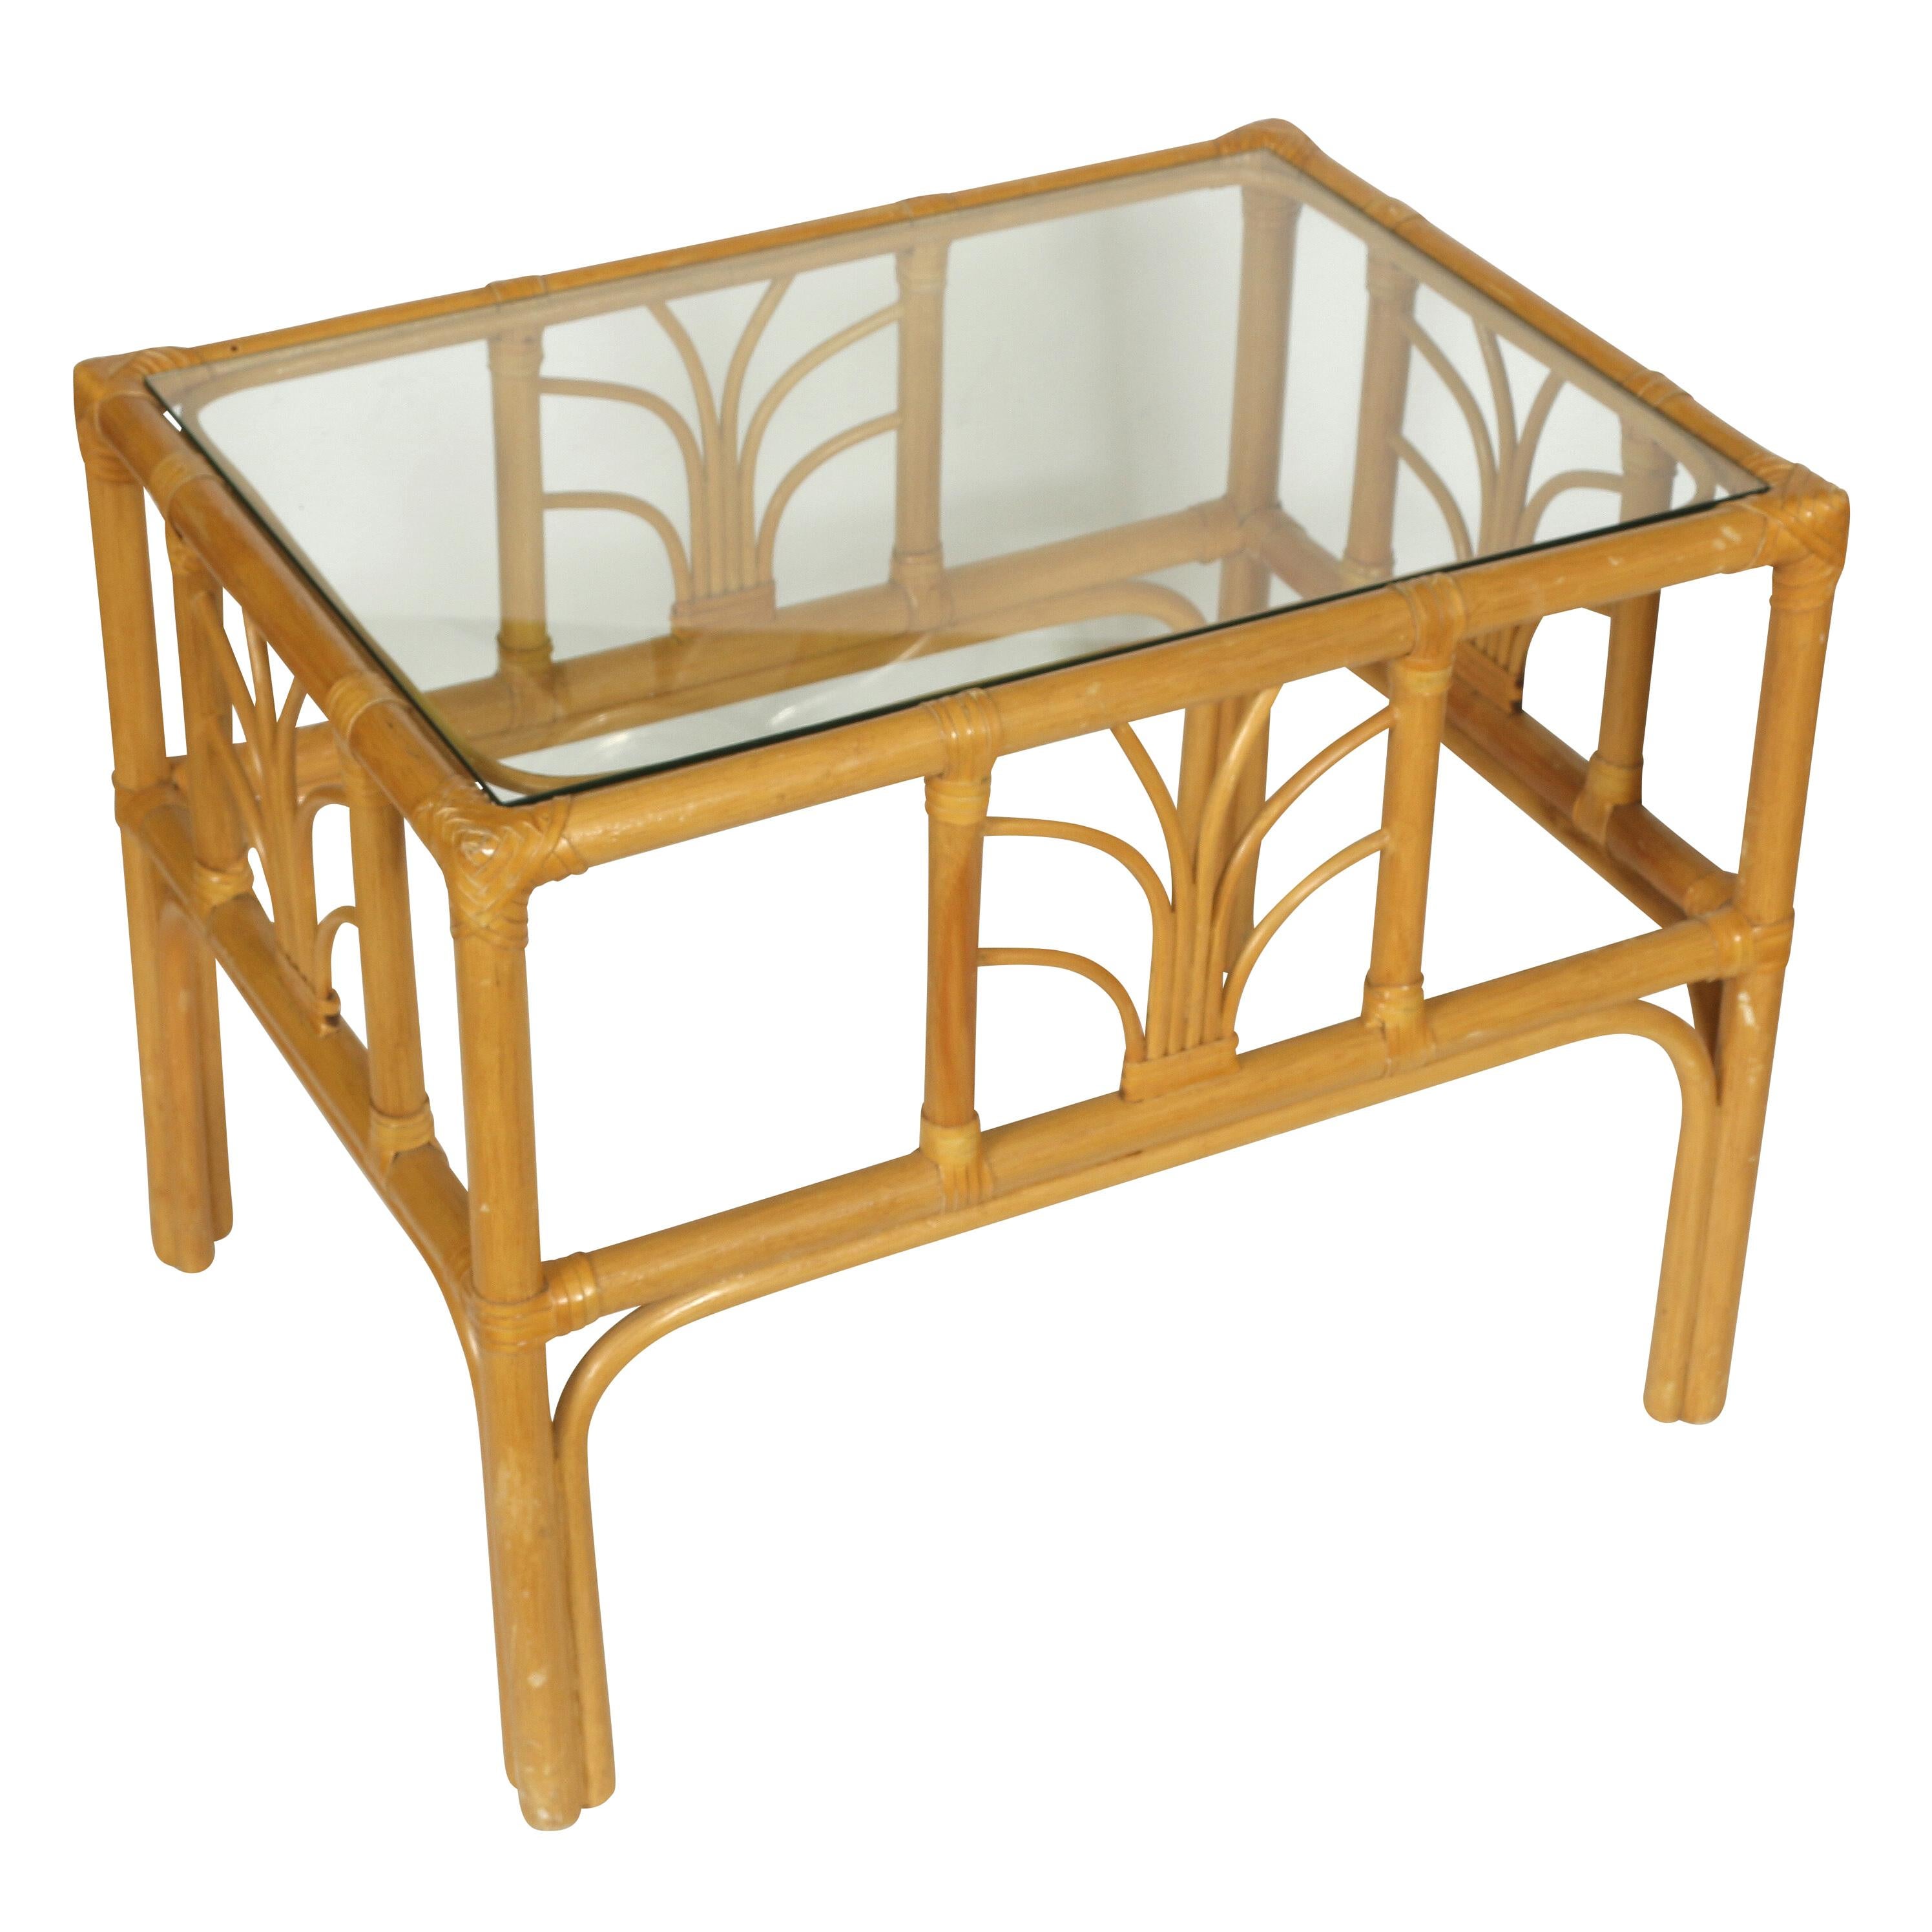 A nice little pair of faux bamboo side tables with a leaf design on each side and a glass top. This duo could serve as bedside tables or flanking a sofa.